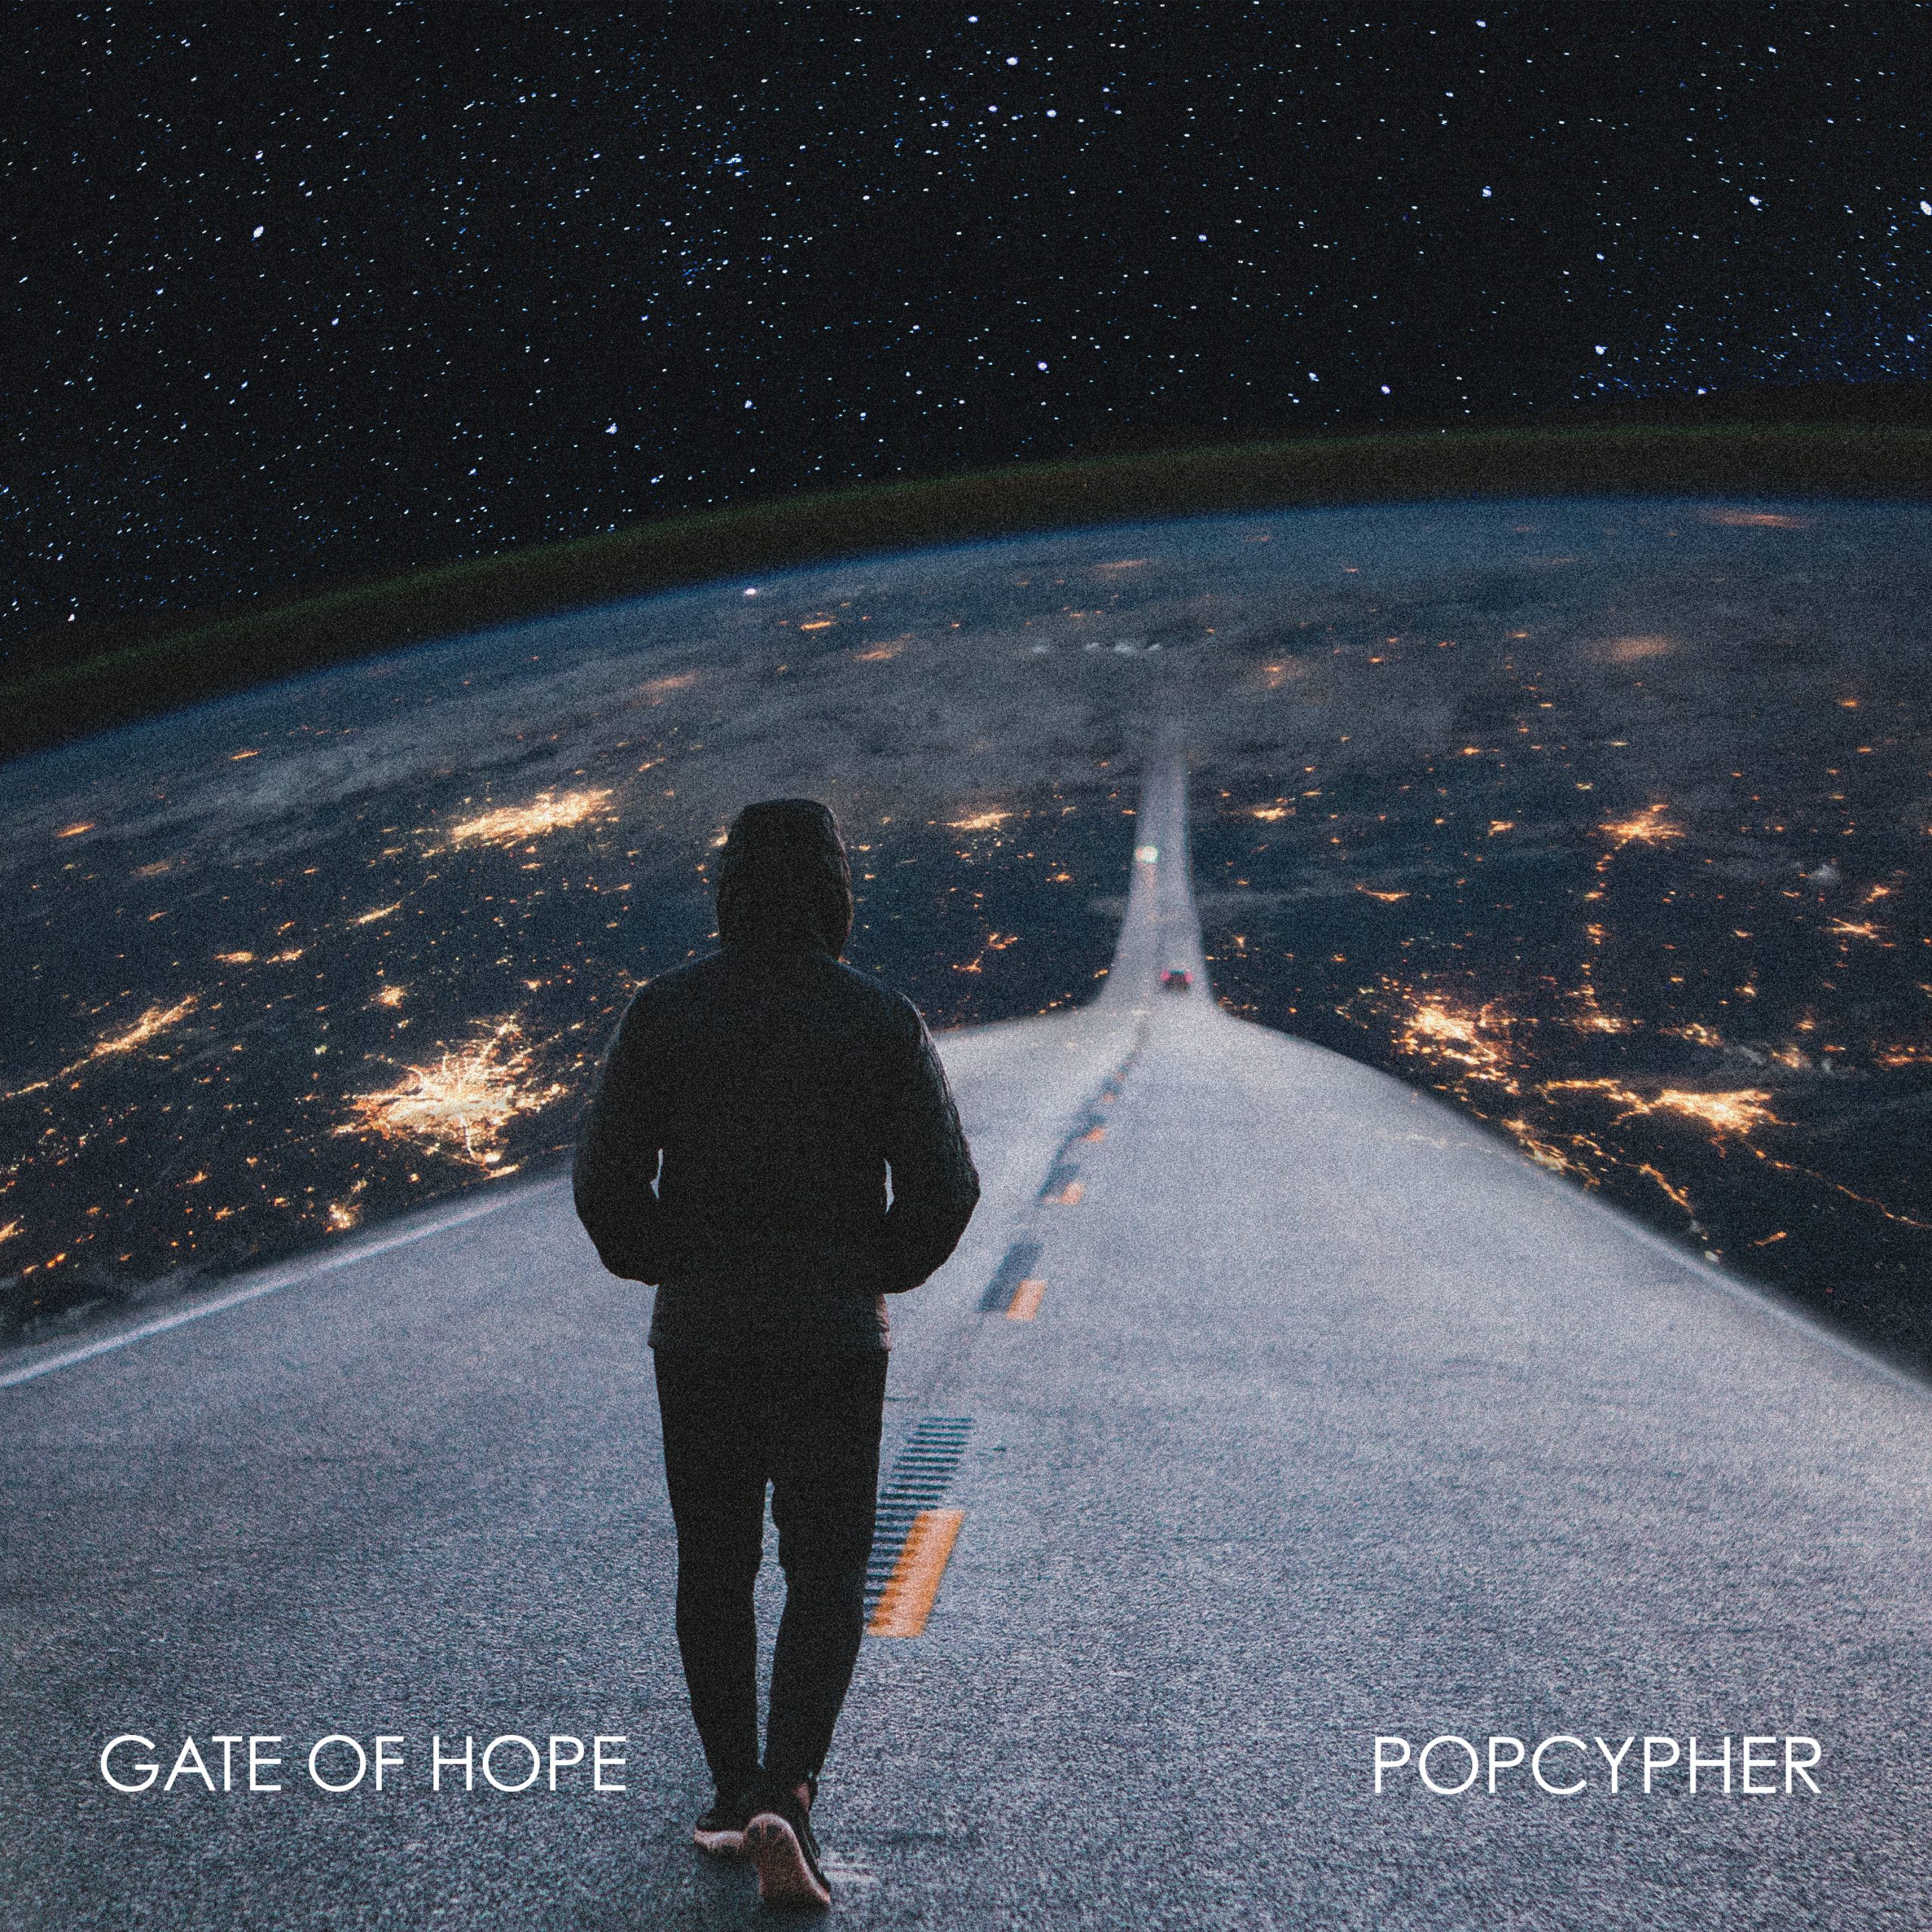 Featuring a resounding chorus with an anthemic lead melody, ‘Gate of Hope’ from ‘Popcypher’ is out now.